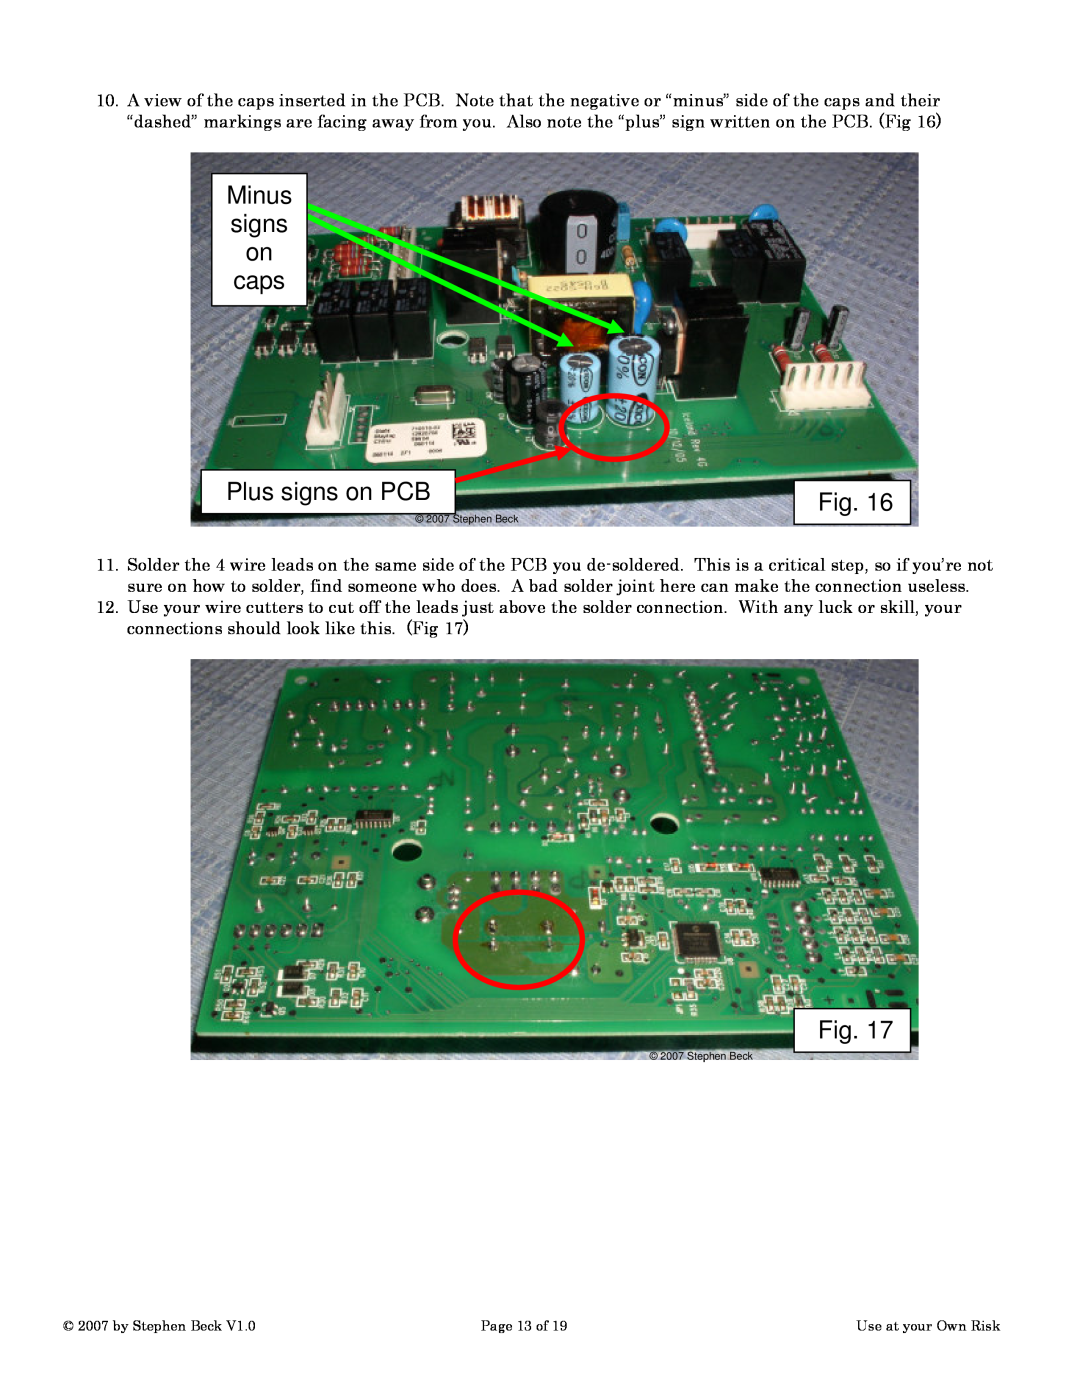 Maytag MFI2568AEW manual Minus signs on caps Plus signs on PCB, by Stephen Beck, Page 13 of, Use at your Own Risk 